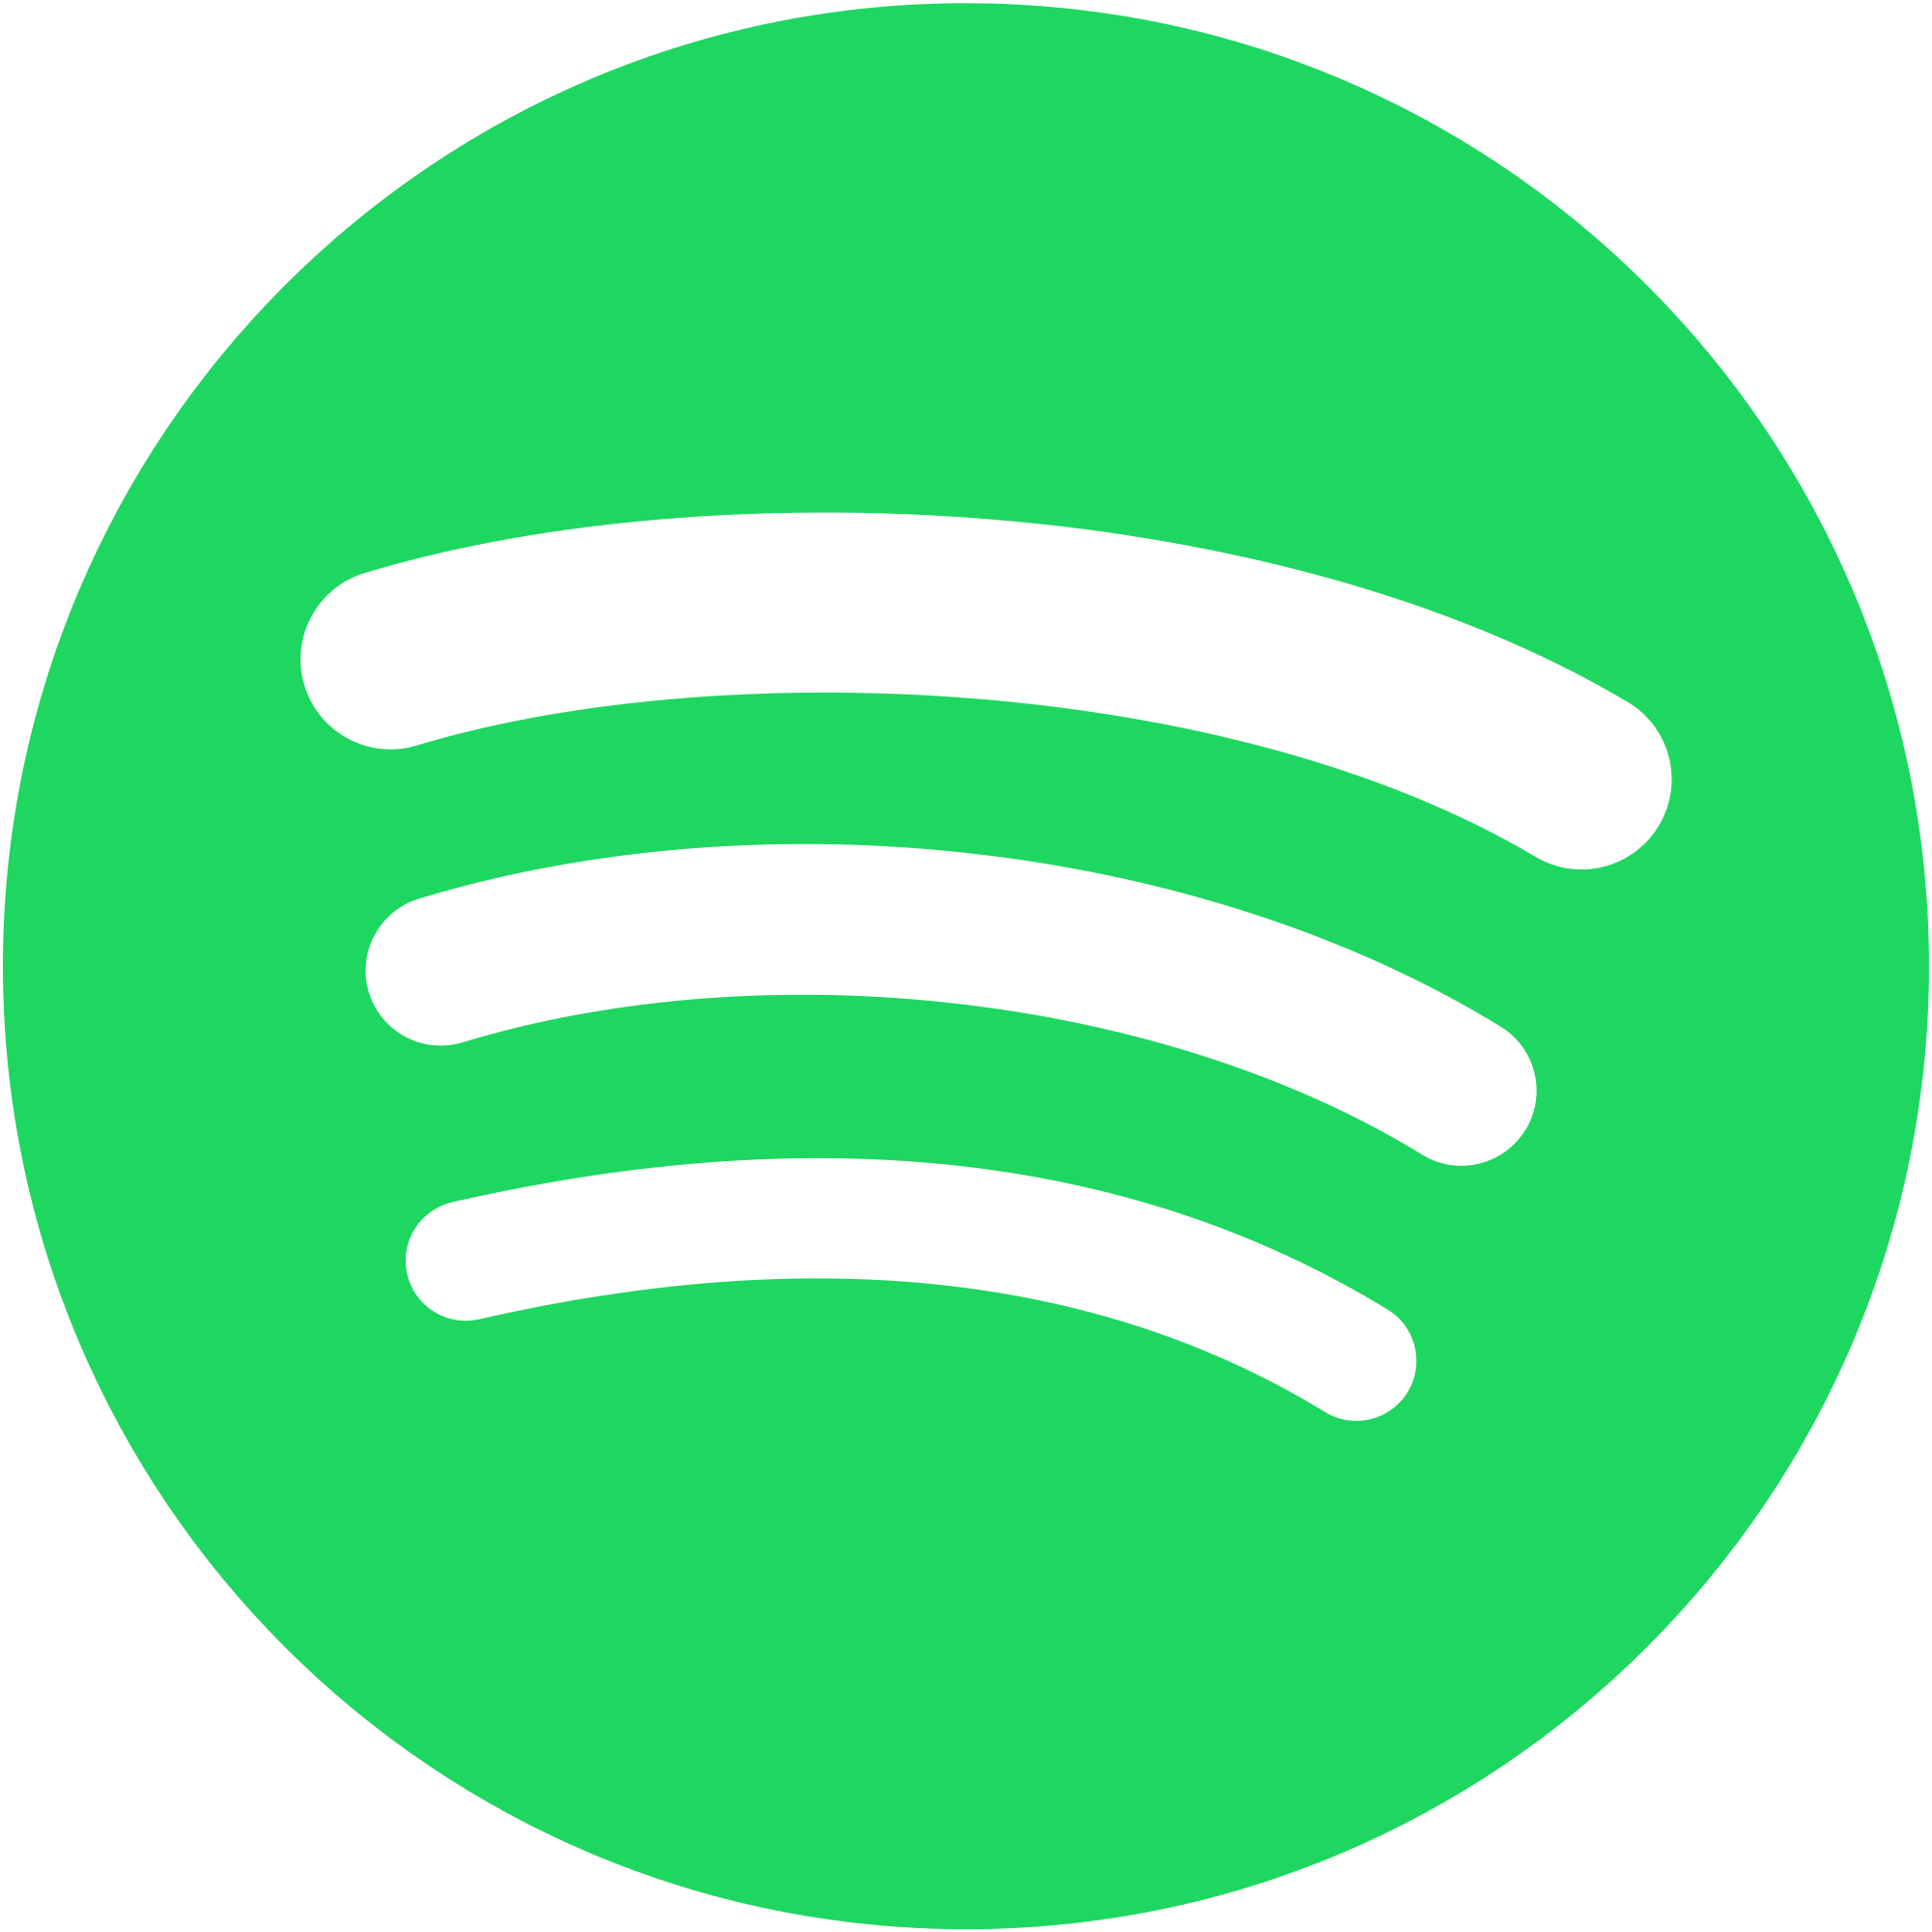 Spotify_logo_without_text.svg.png